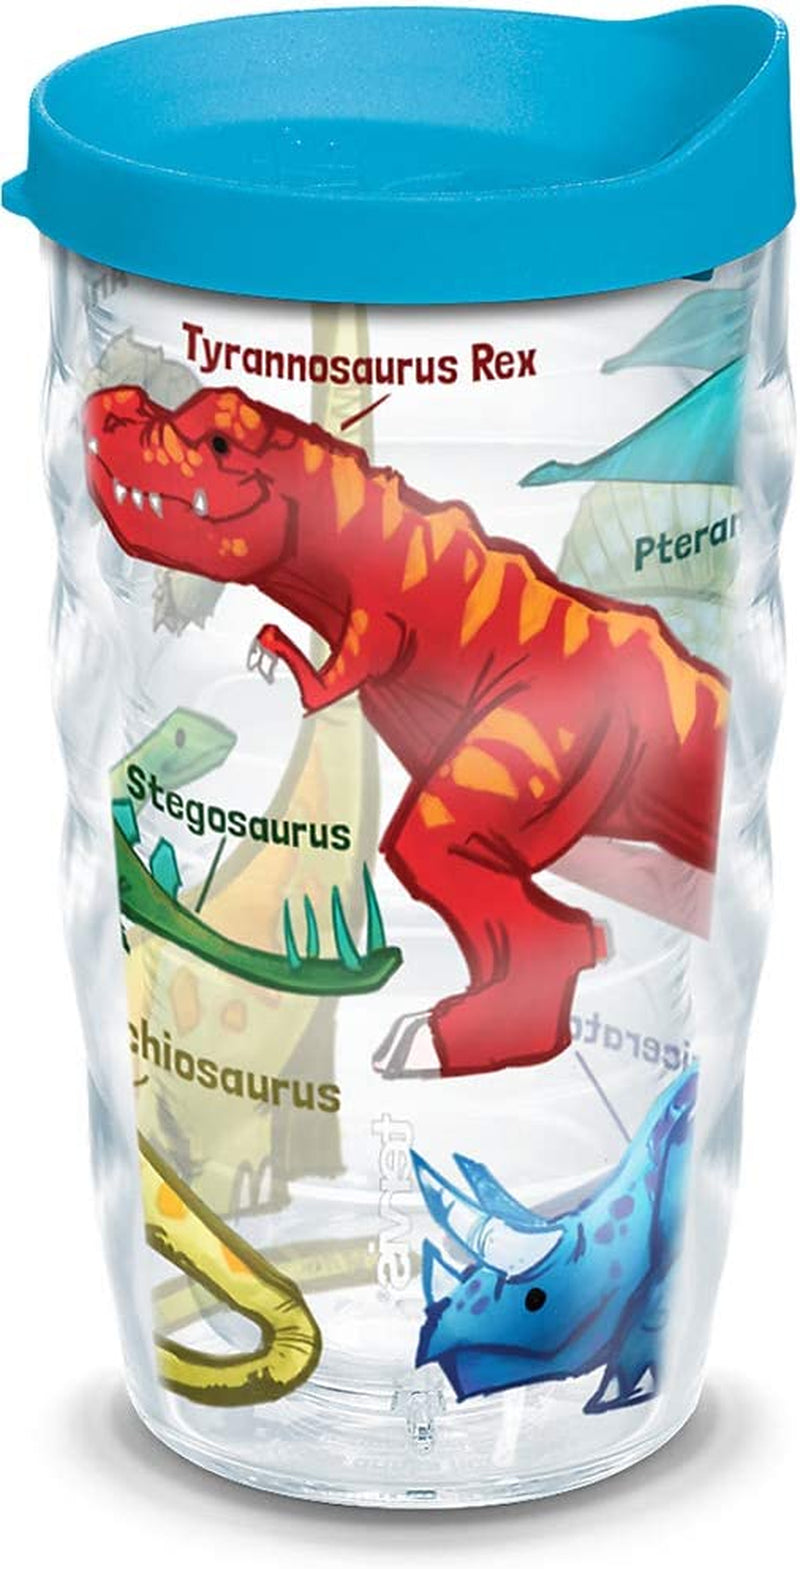 Tervis Made in USA Double Walled Dinosaurs Insulated Tumbler Cup Keeps Drinks Cold & Hot, 16Oz, Clear Home & Garden > Kitchen & Dining > Tableware > Drinkware Tervis Light Blue Lid 10oz Wavy 